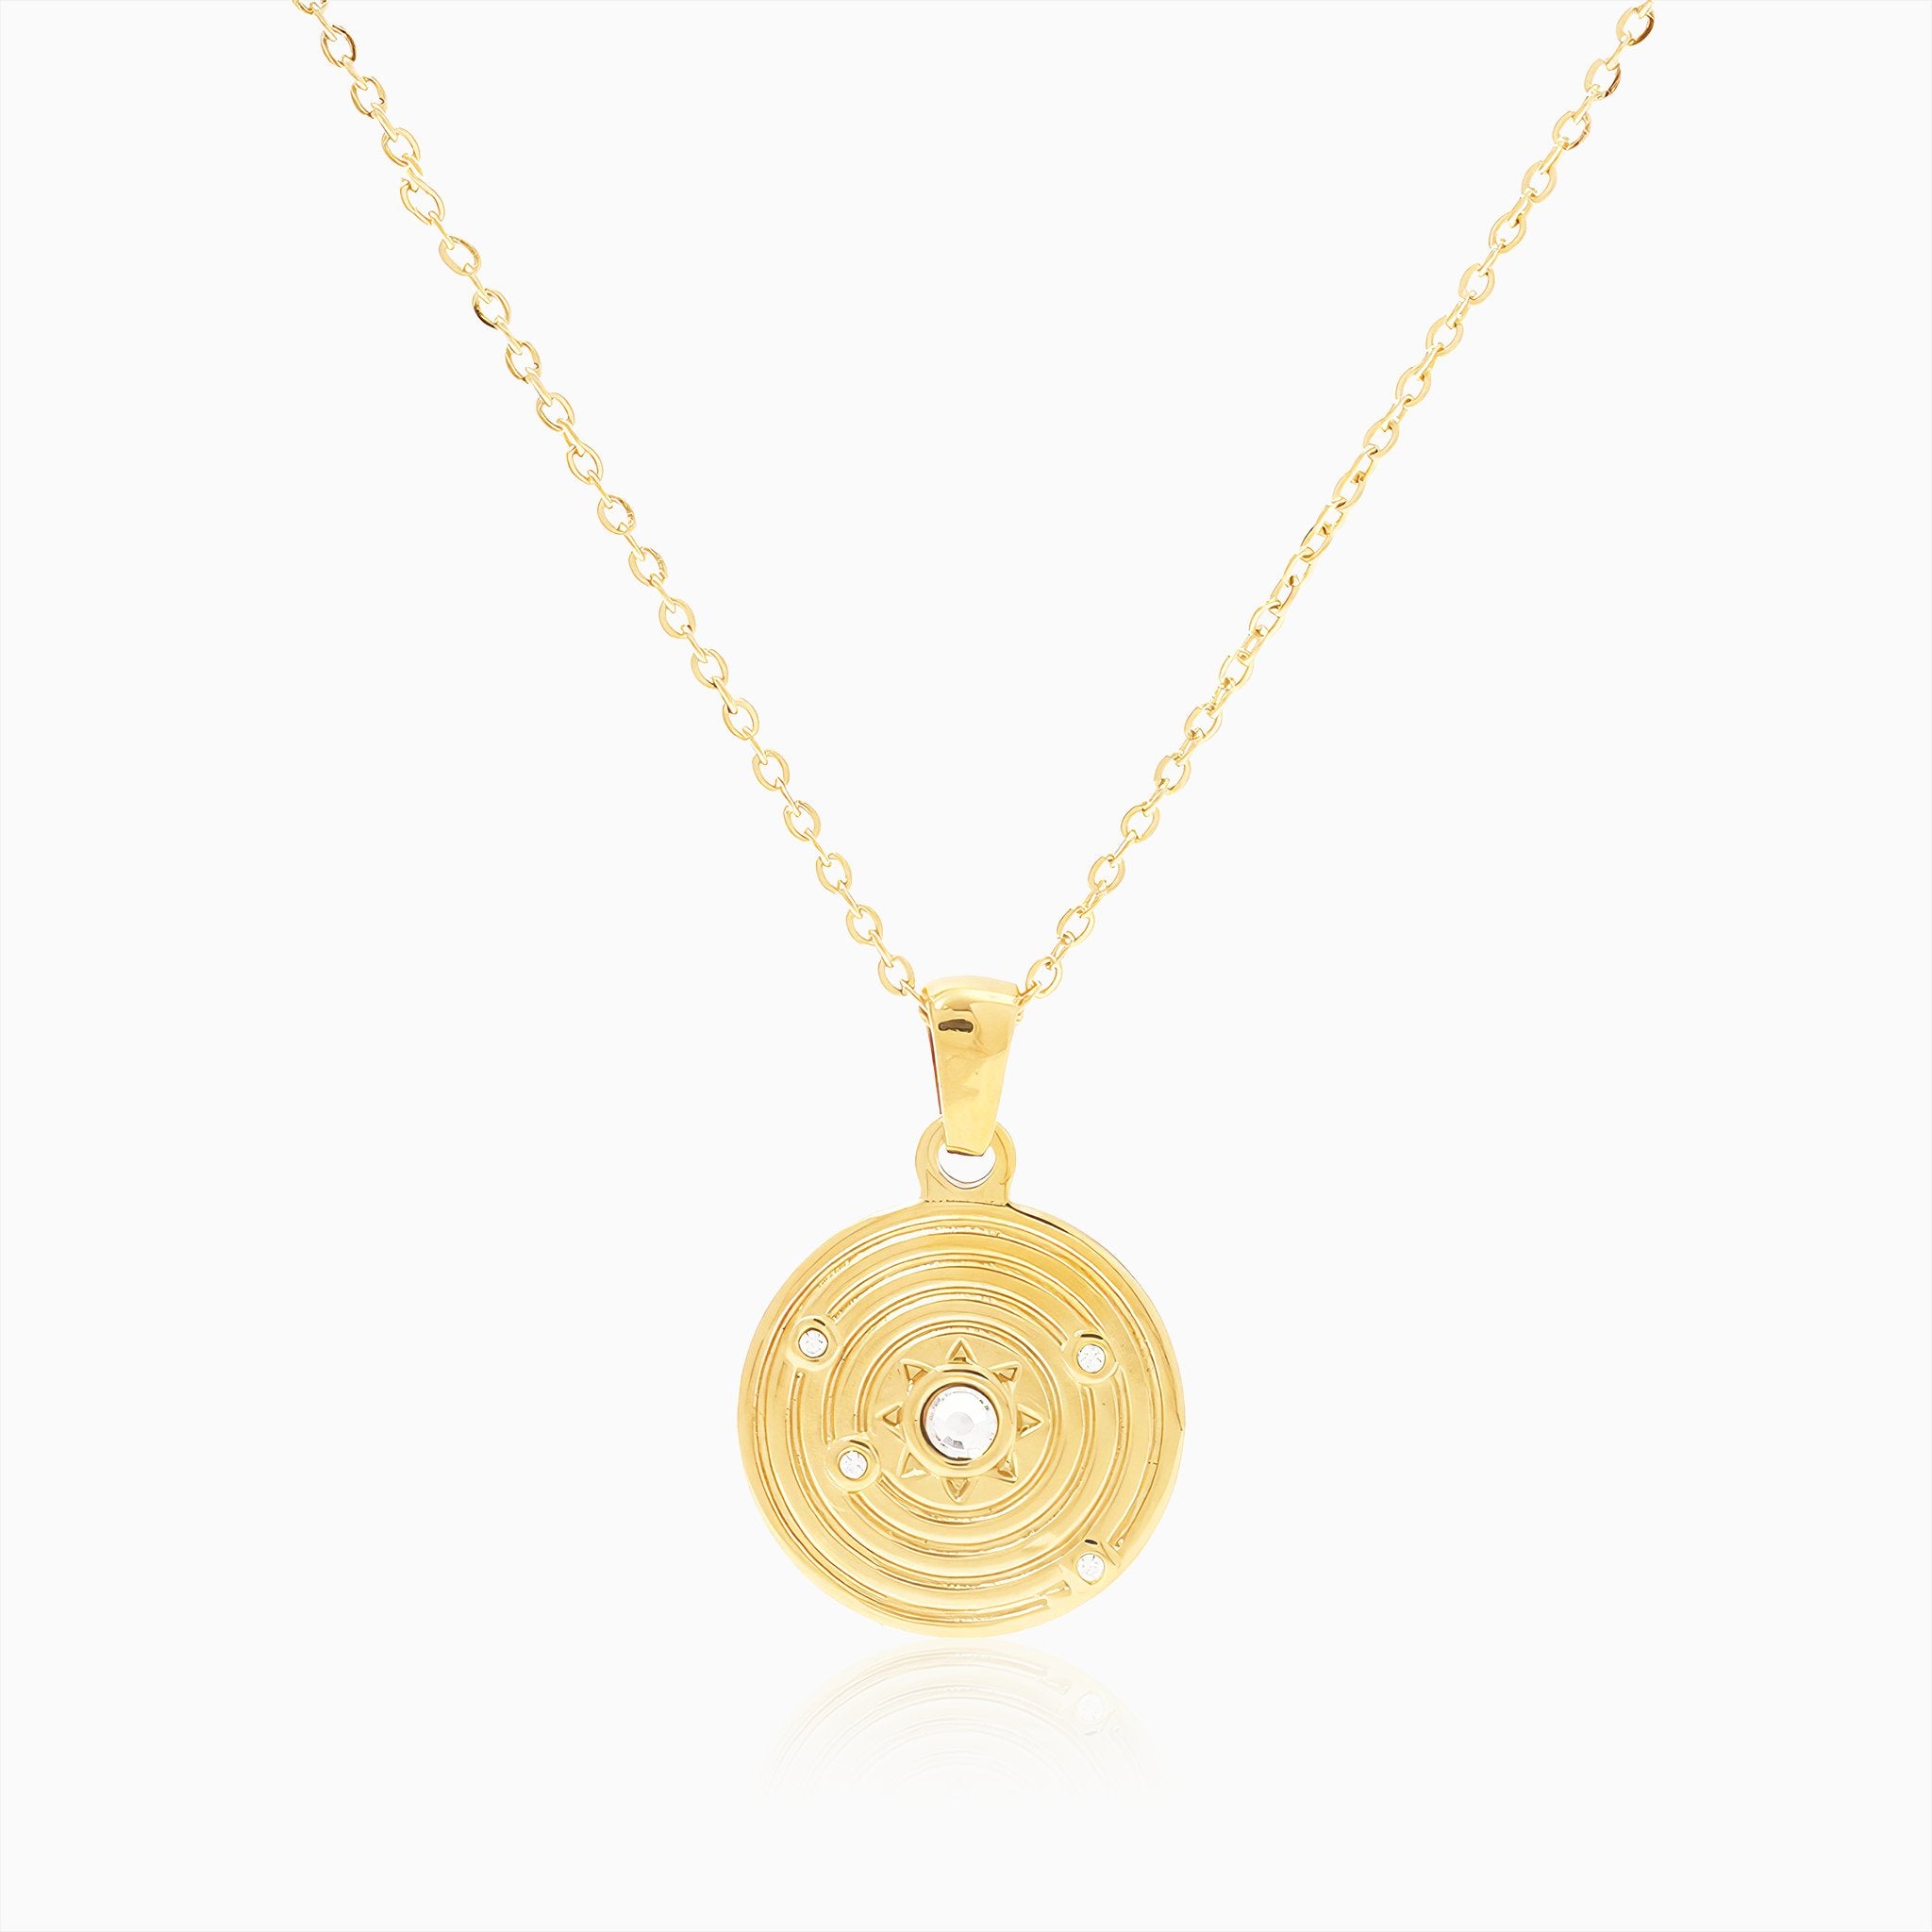 Concentric Circle Pendant Choker - Nobbier - Necklace - 18K Gold And Titanium PVD Coated Jewelry